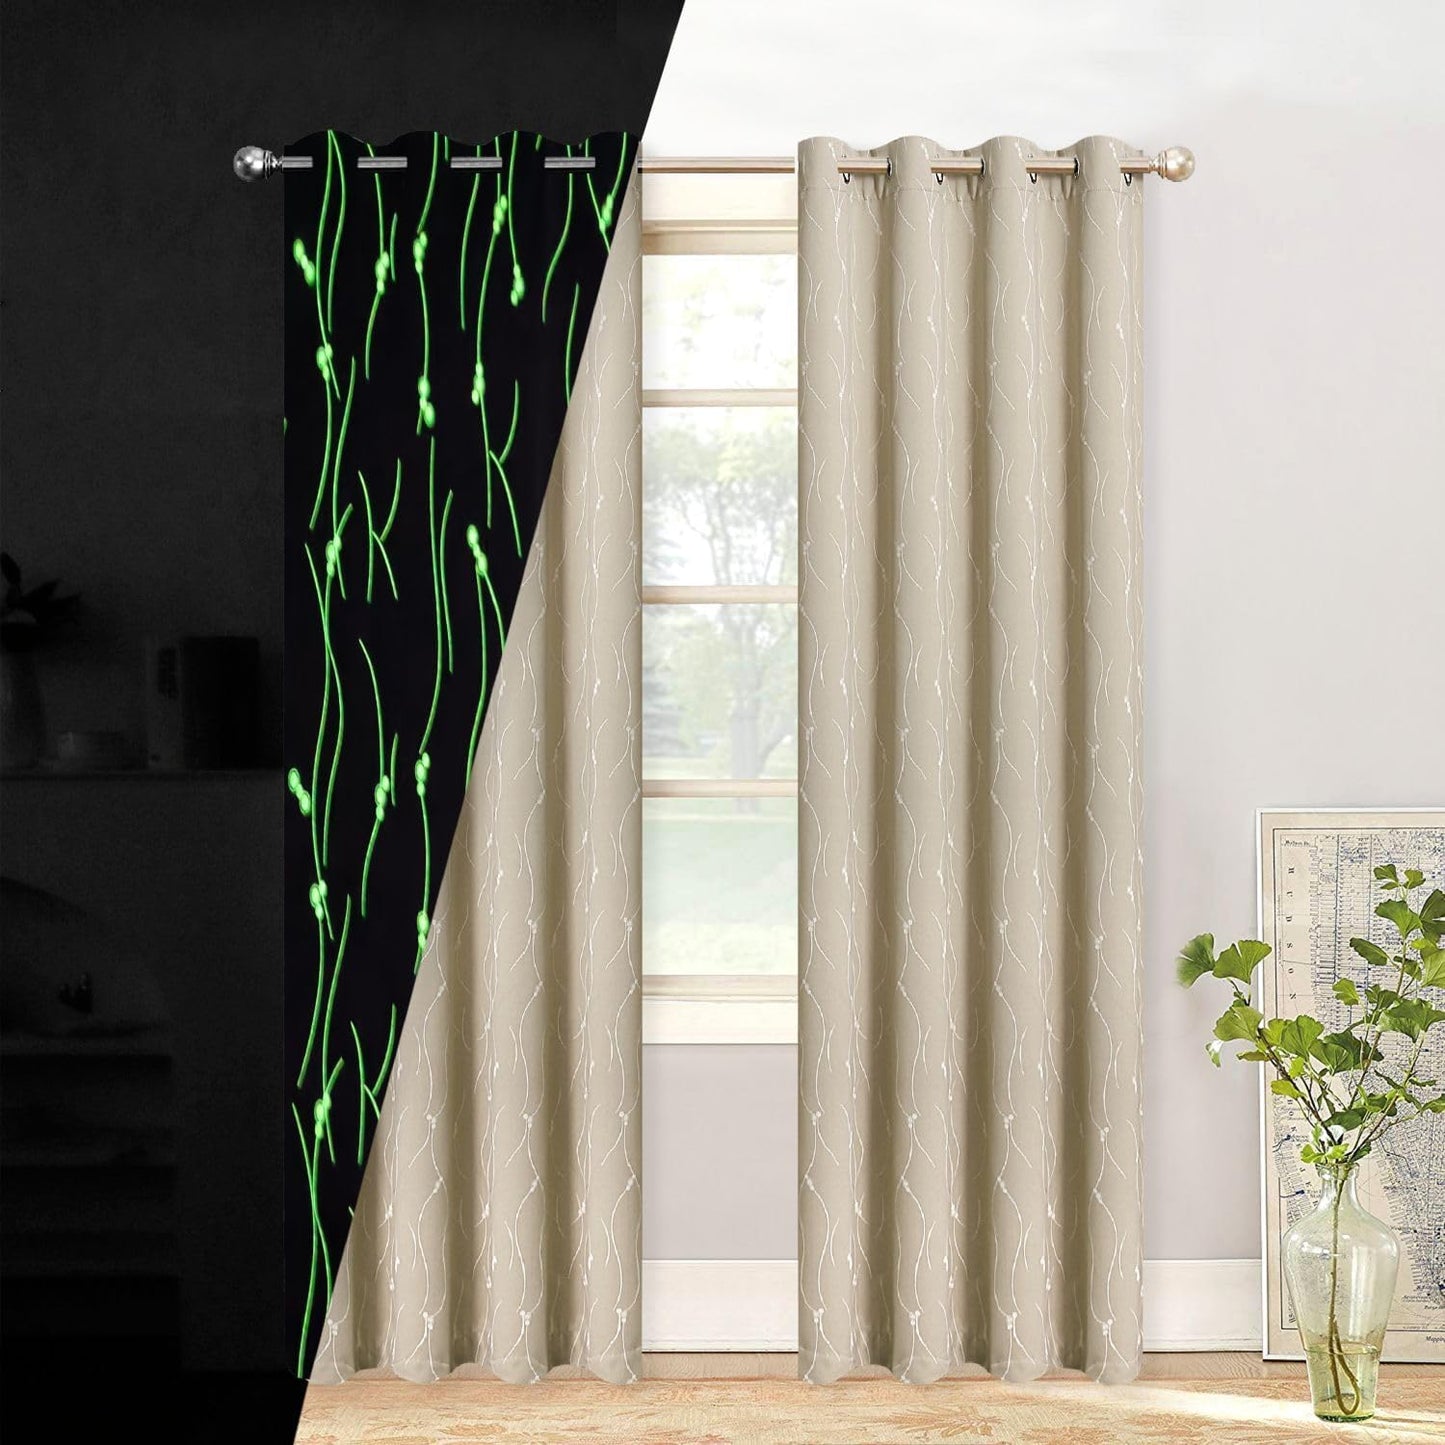 TMLTCOR Blackout Curtains for Bedroom,Bedroom Curtains for Living Room,Room Darkening Curtains 84 Inches Long,Glow in the Dark Navy Blue Curtains for Kids Bedroom,52 Inches Wide,2 Panels,Curve  TMLTCOR Beige/Curve 52"W*84"L 